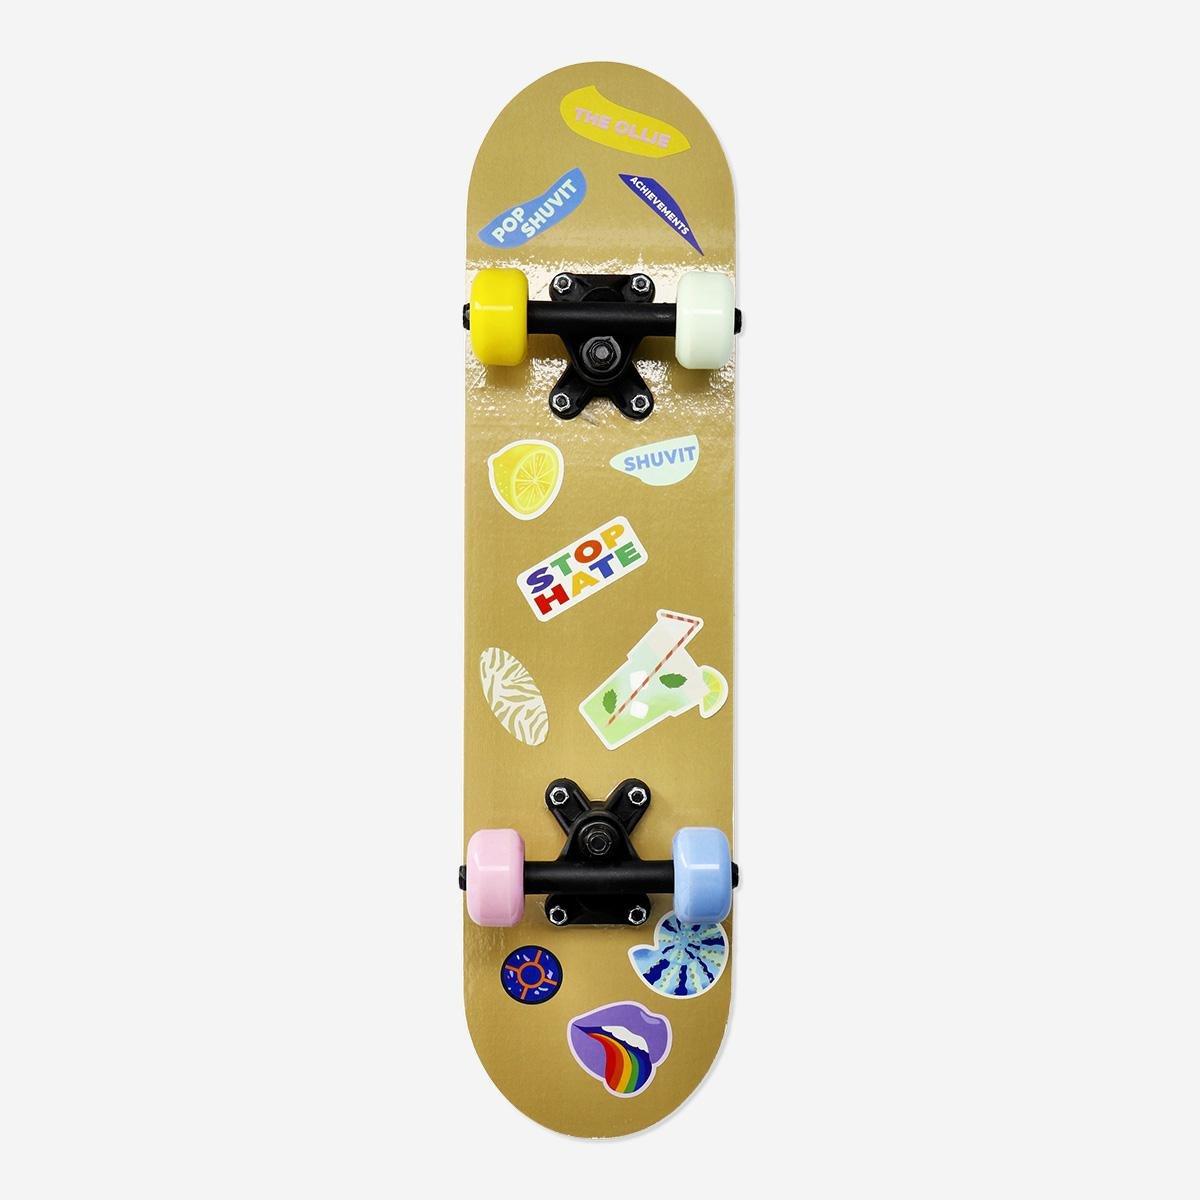 Multicolour skateboard with stickers